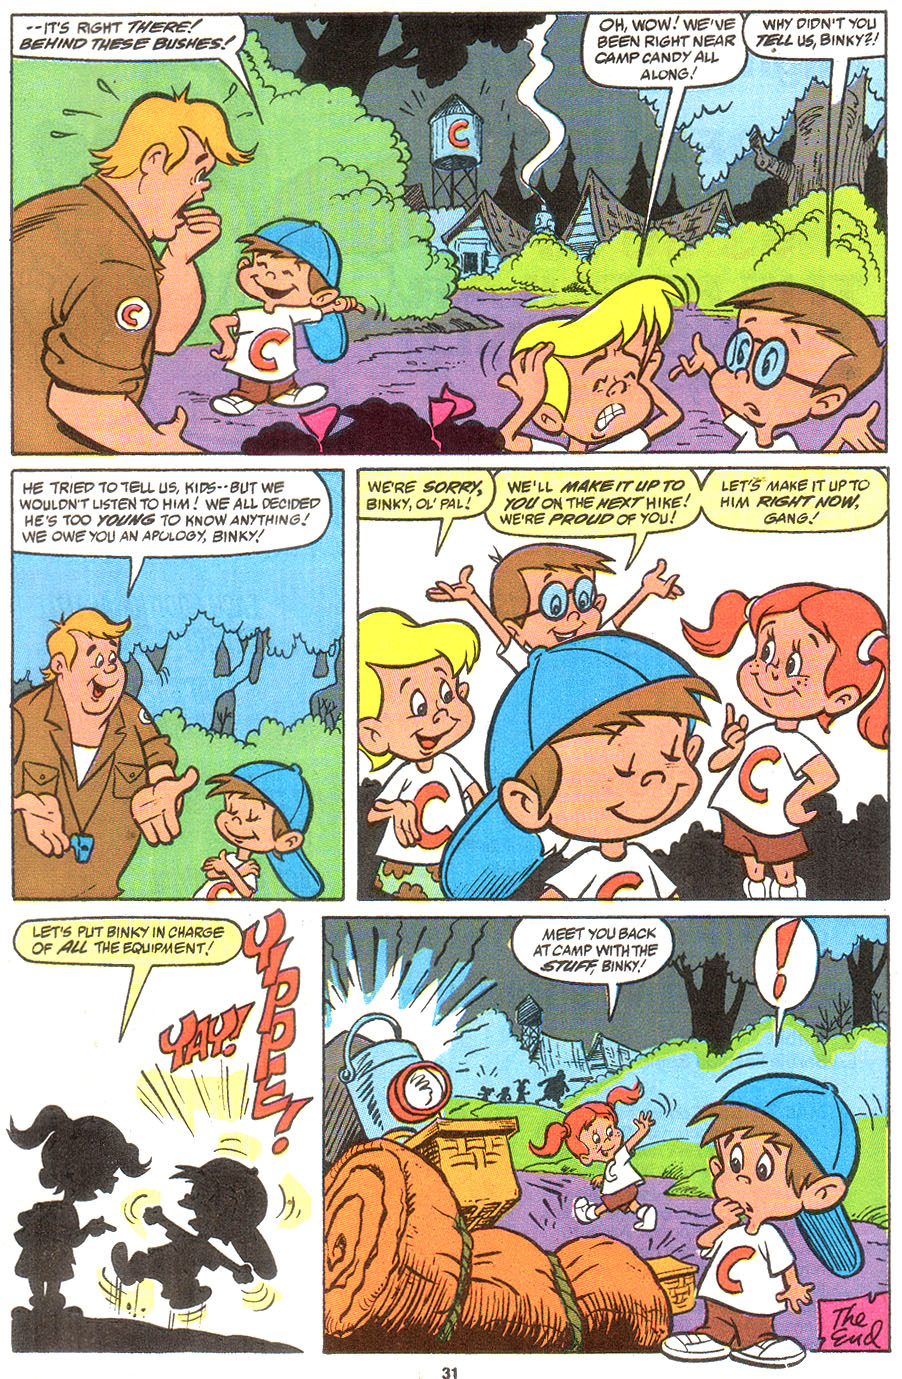 Read online Camp Candy comic -  Issue #5 - 33